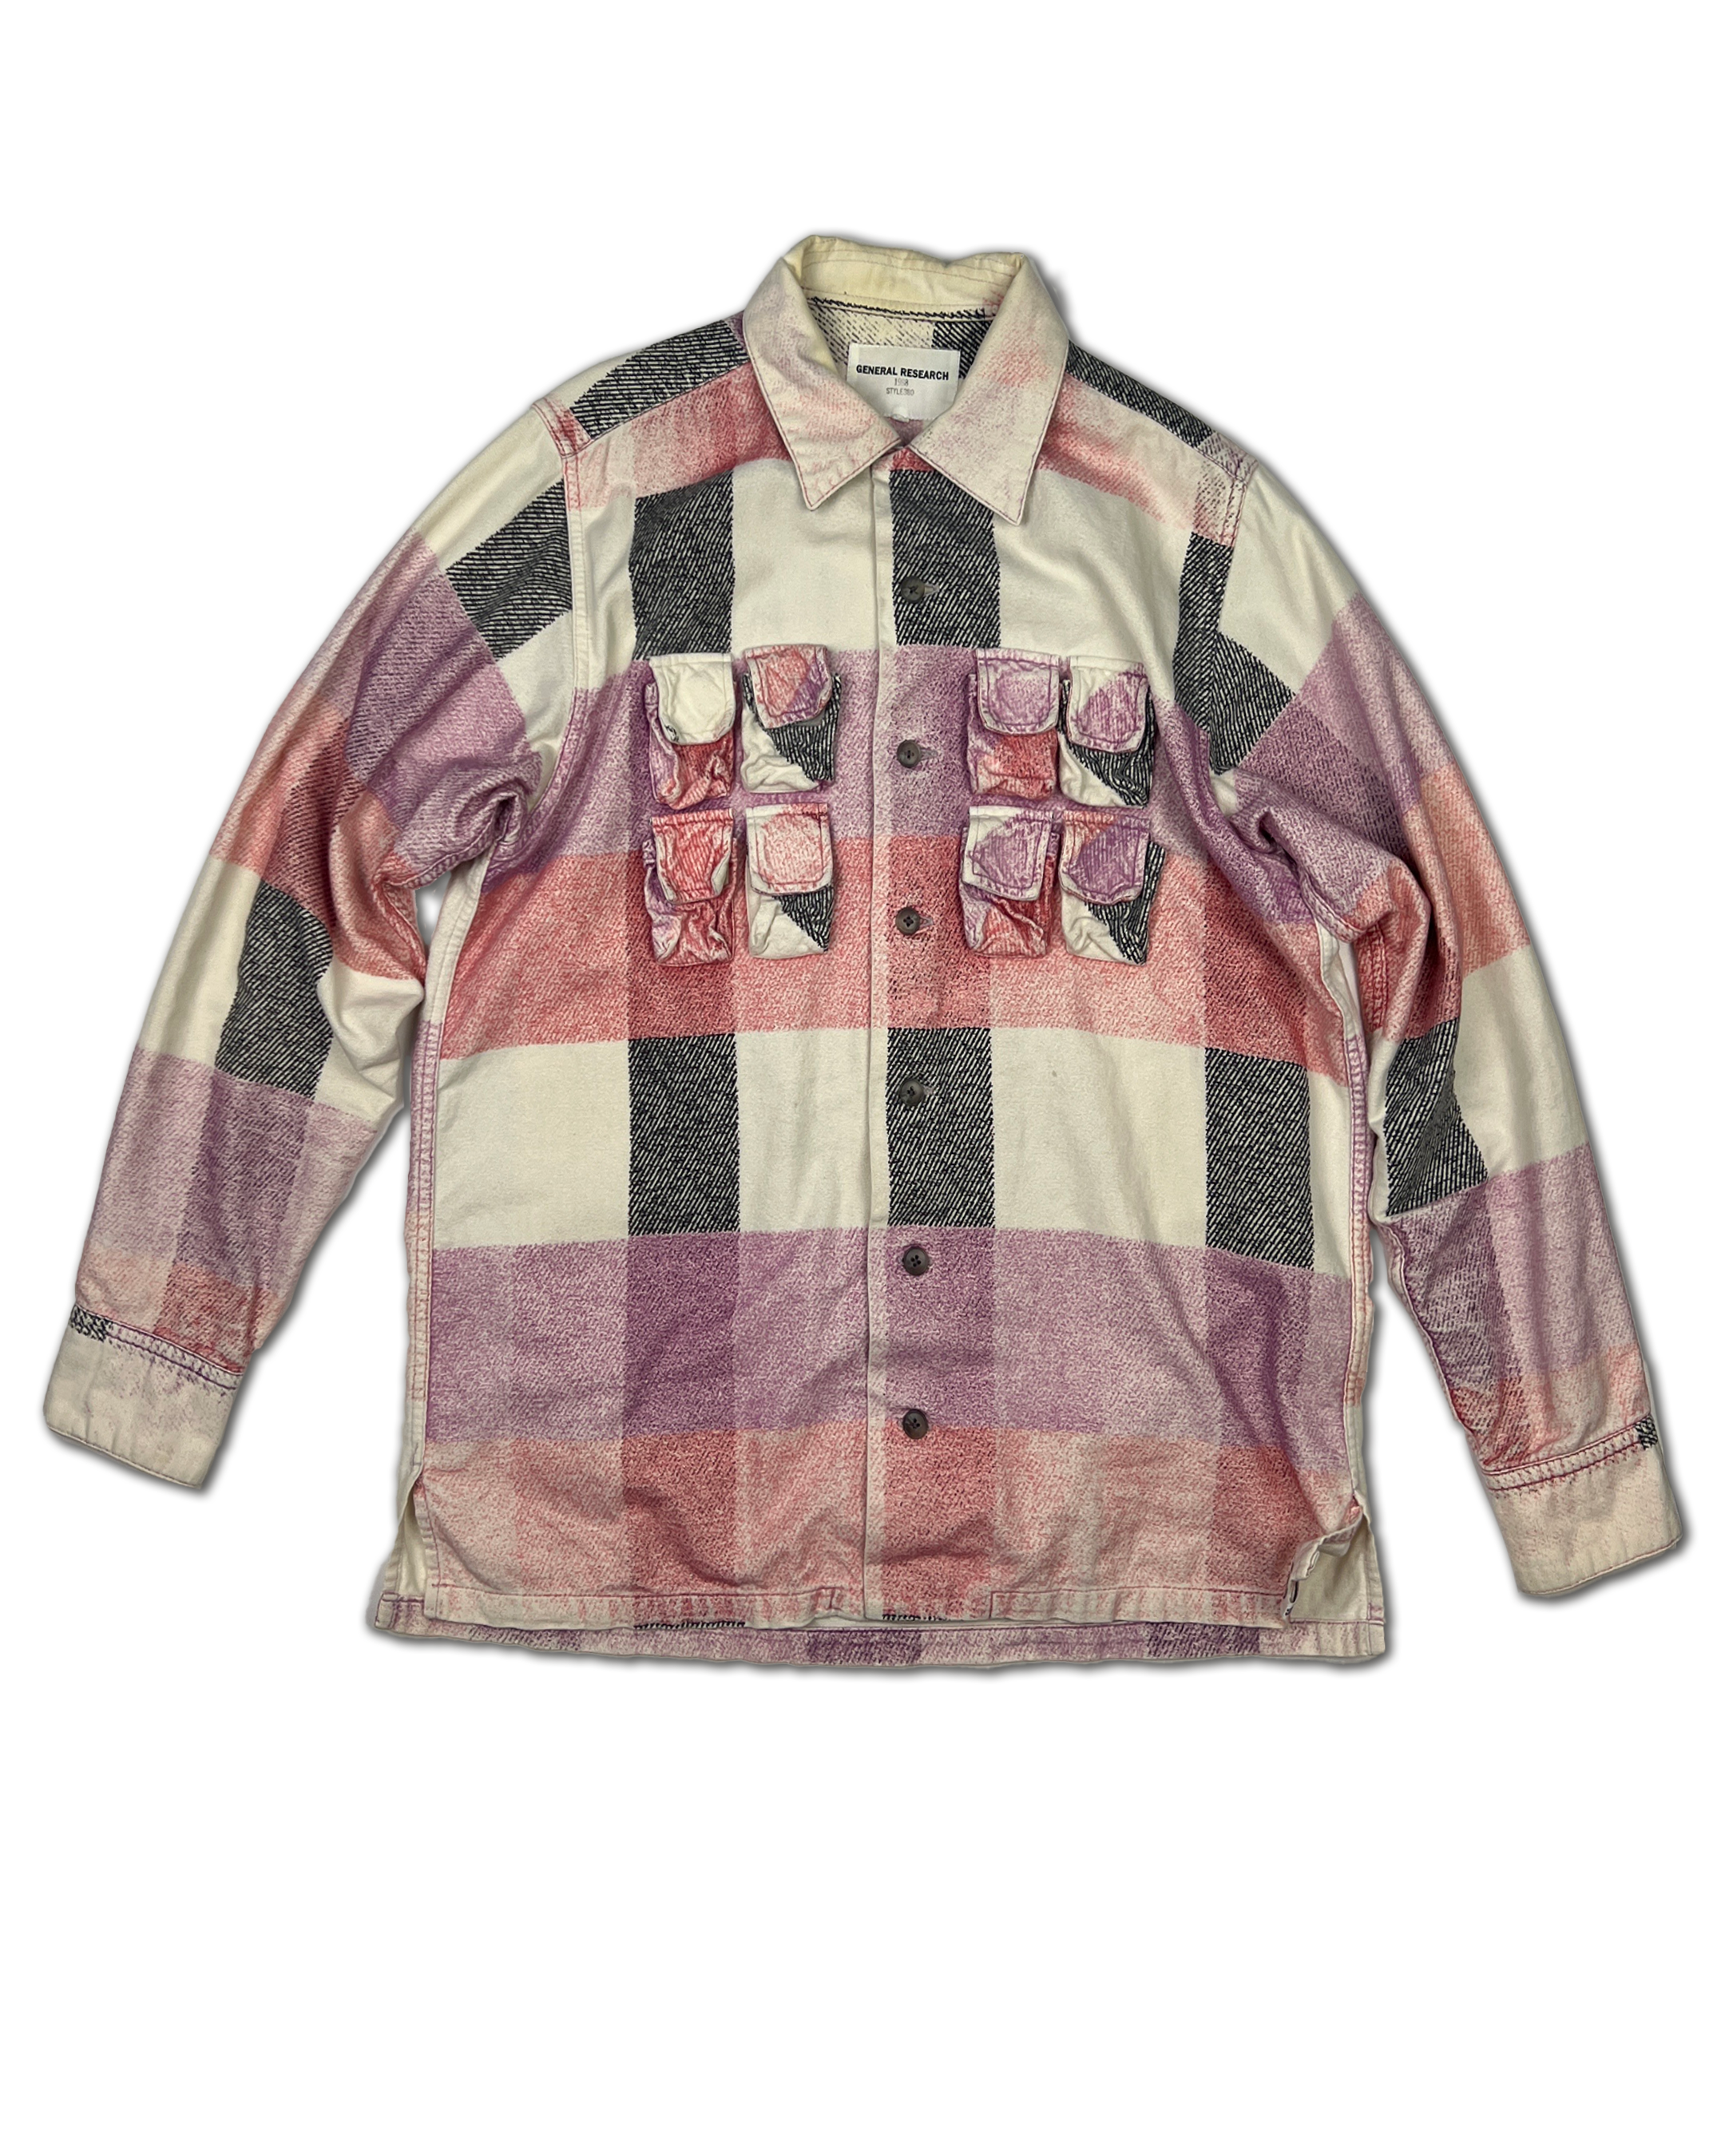 General Research 1999 Parasite Button Up